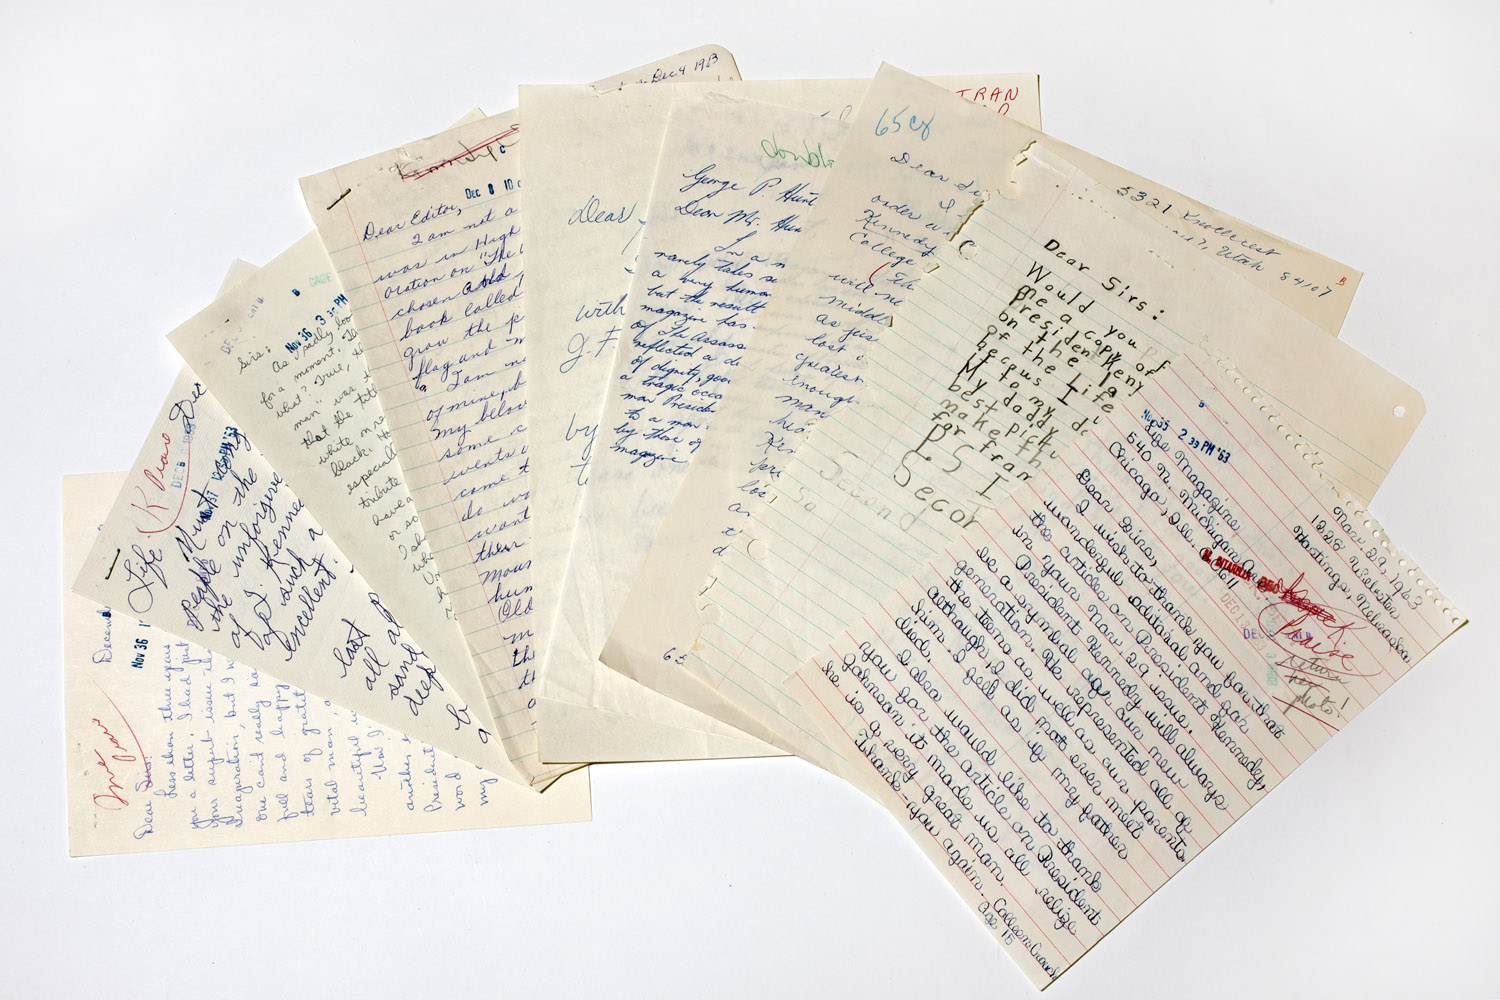 A sample of the hundreds of letters LIFE received following the publication of the JFK memorial edition in late 1963.